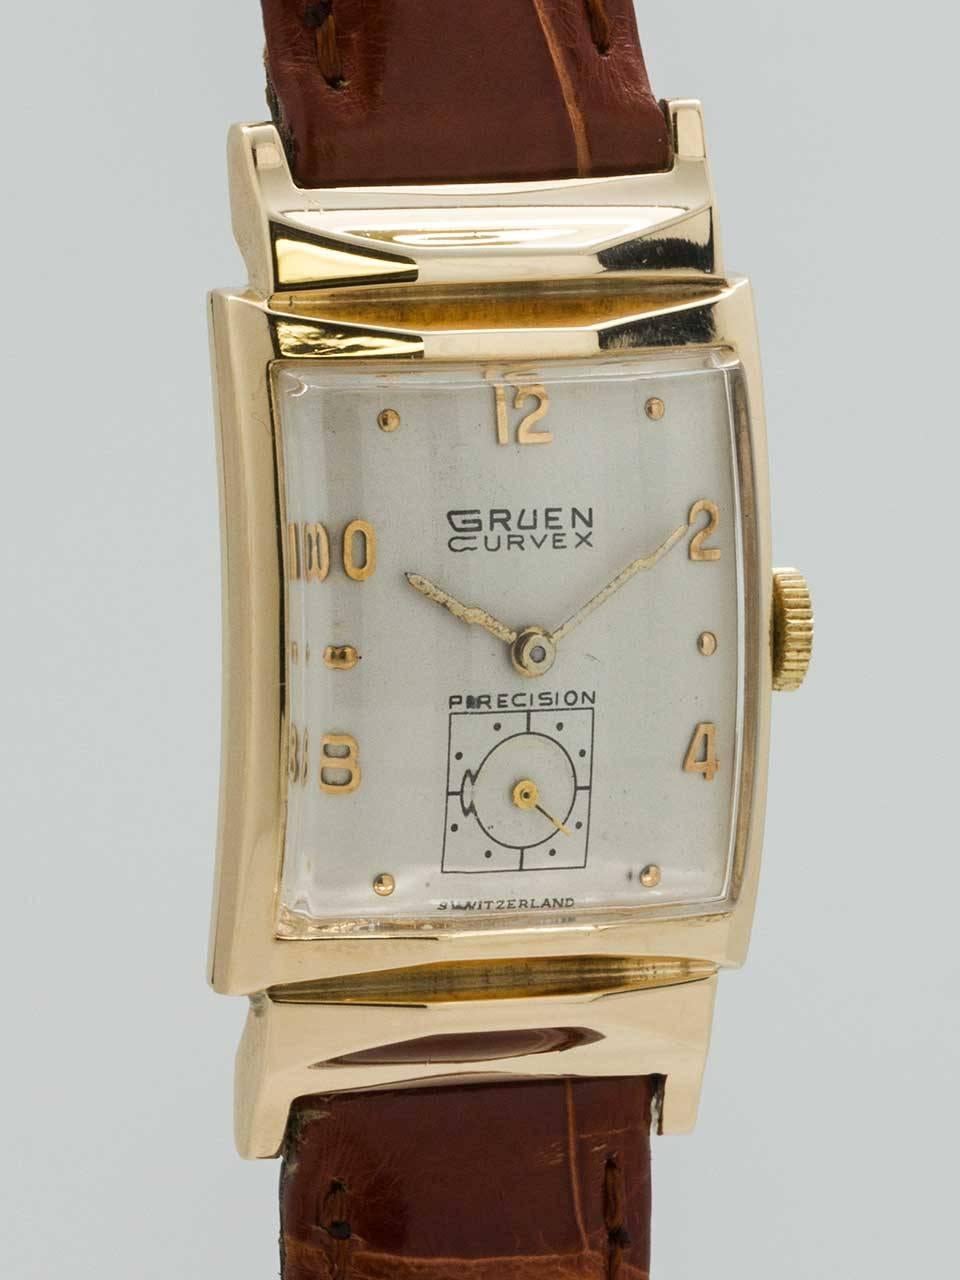 Gruen Curvex 14K YG circa 1940’s. Elongated case, measuring 24 x 36mm, with faceted hooded design and with faceted crystal. Silvered satin dial with raised gold indexes and gilt baton hands. The faceted crystal makes the text on the dial appear